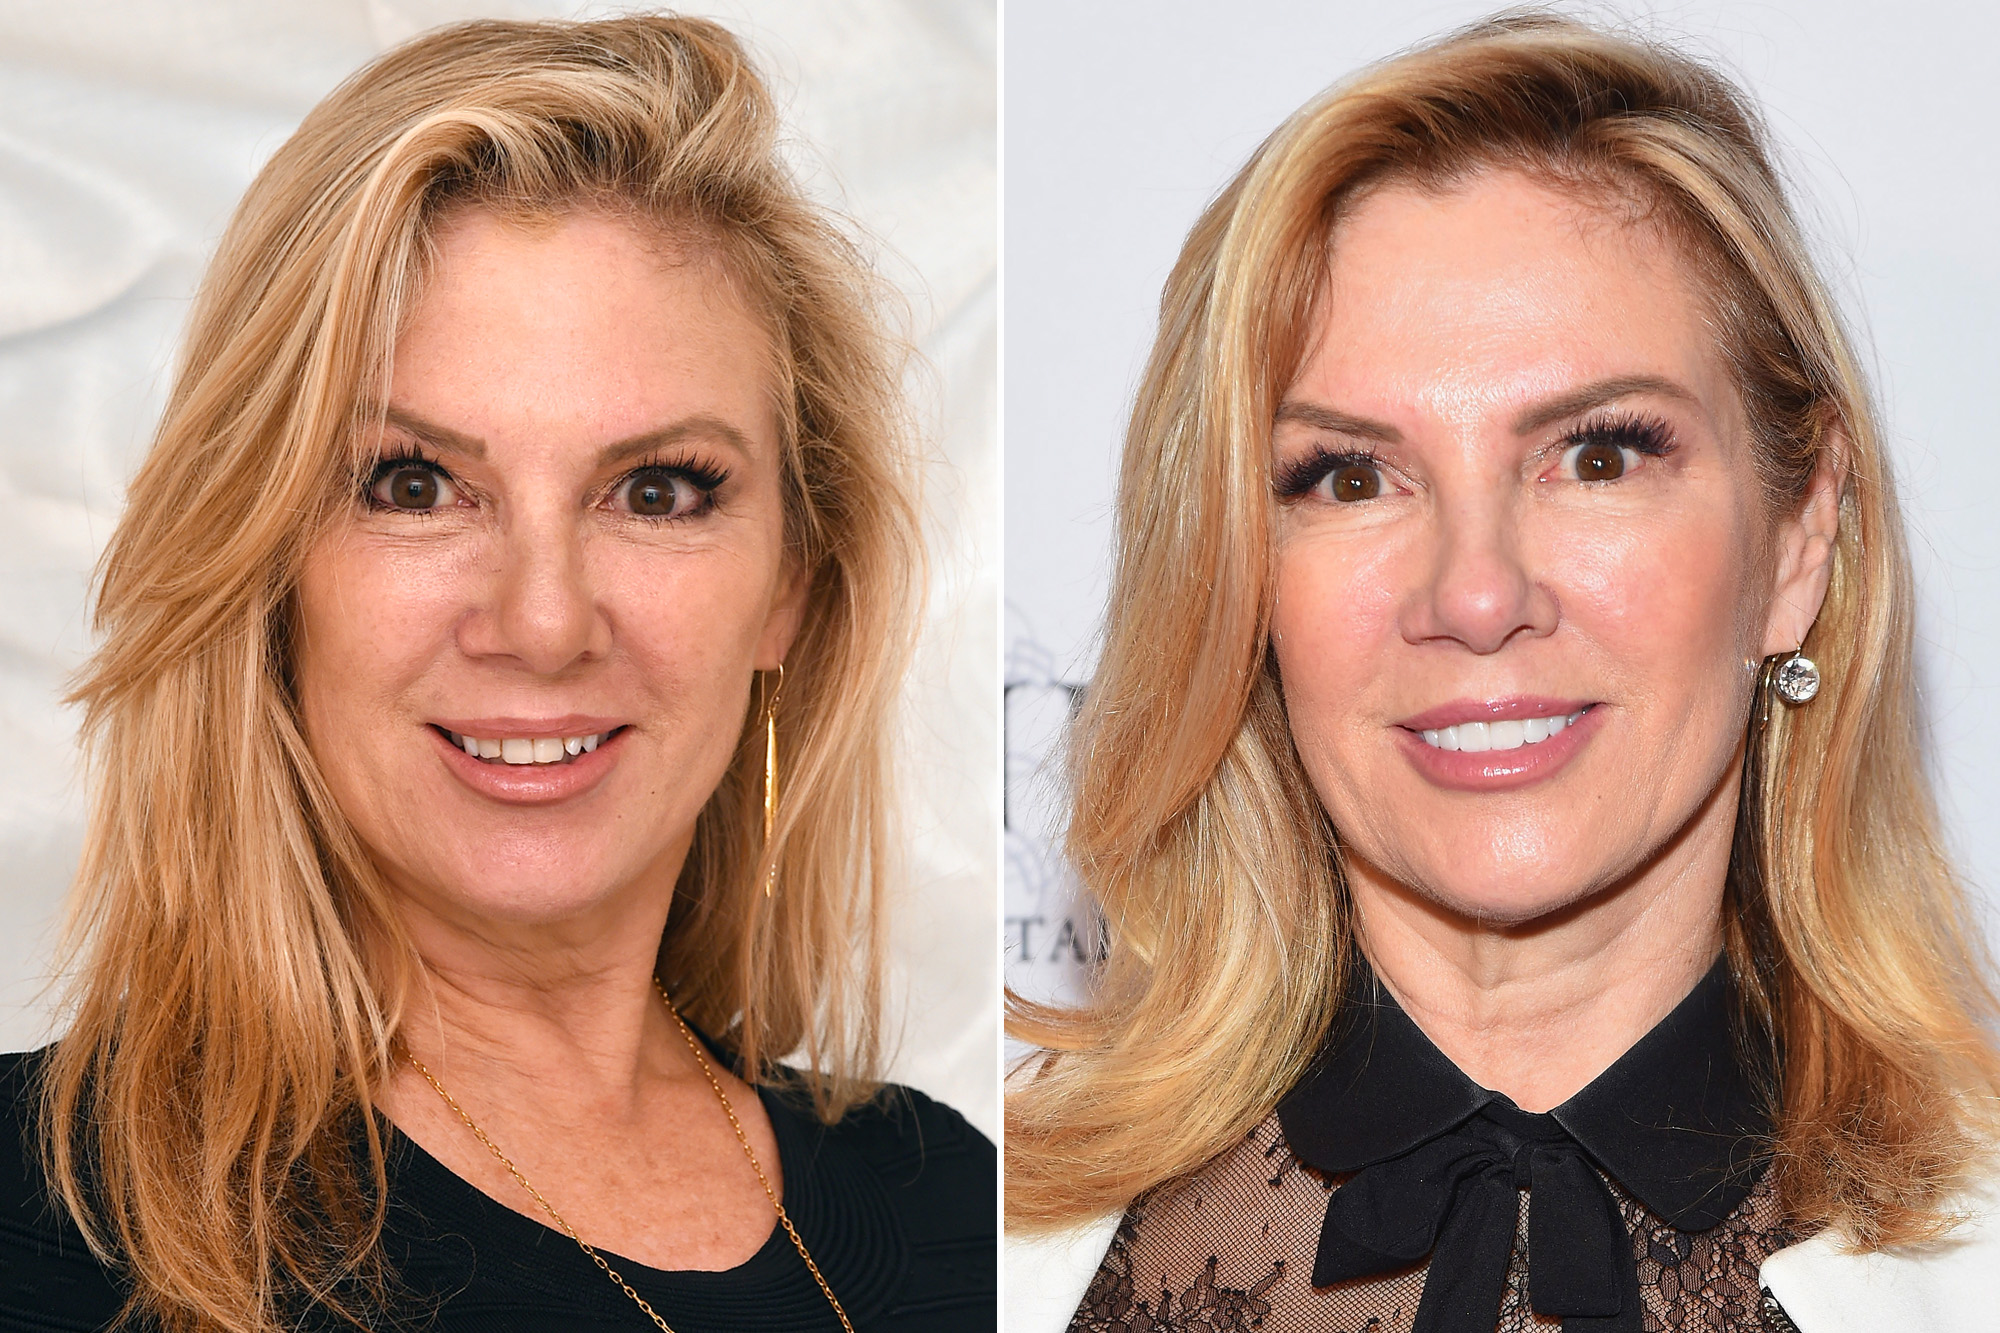 "RHONY" star Ramona Singer before and after new veneers.